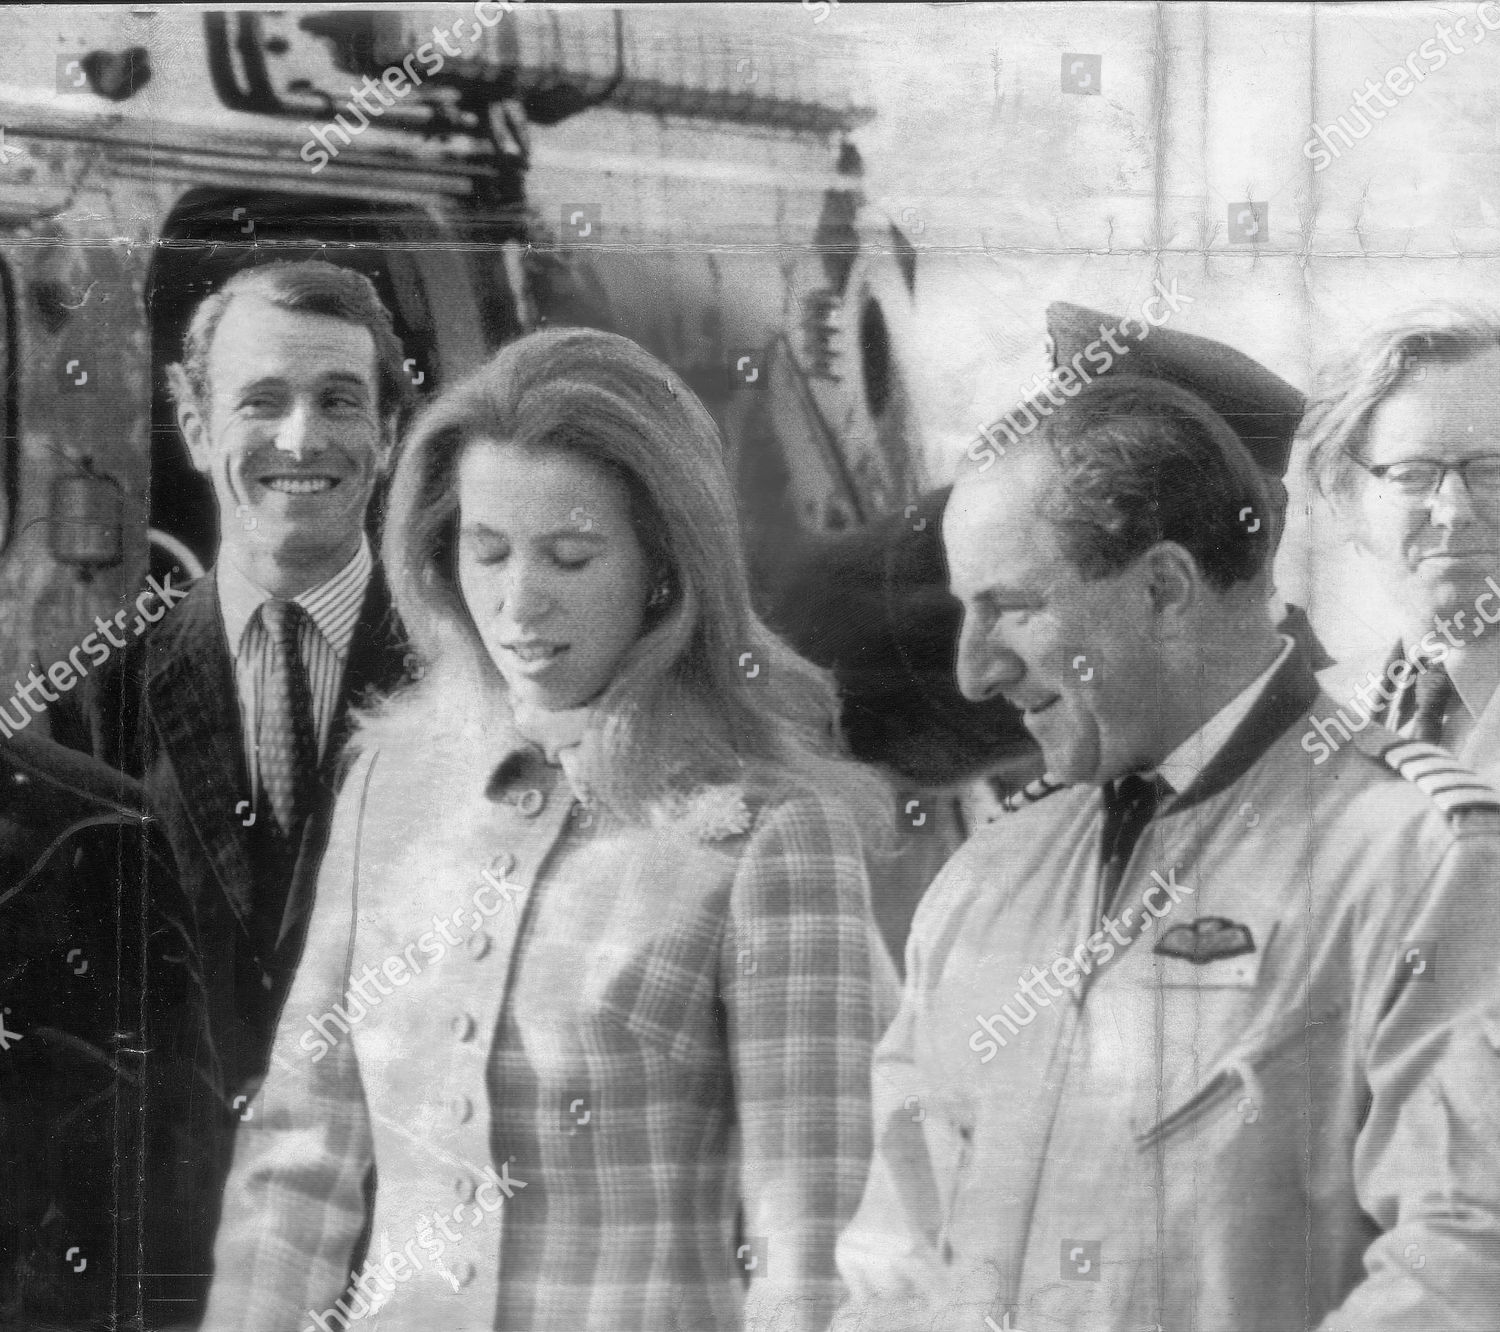 princess-royal-capt-mark-phillips-together-before-marriage-october-1973-princess-anne-and-capt-mark-phillips-about-to-board-a-flight-on-concorde-with-test-pilot-brian-trubshaw-royalty-shutterstock-editorial-891015a.jpg